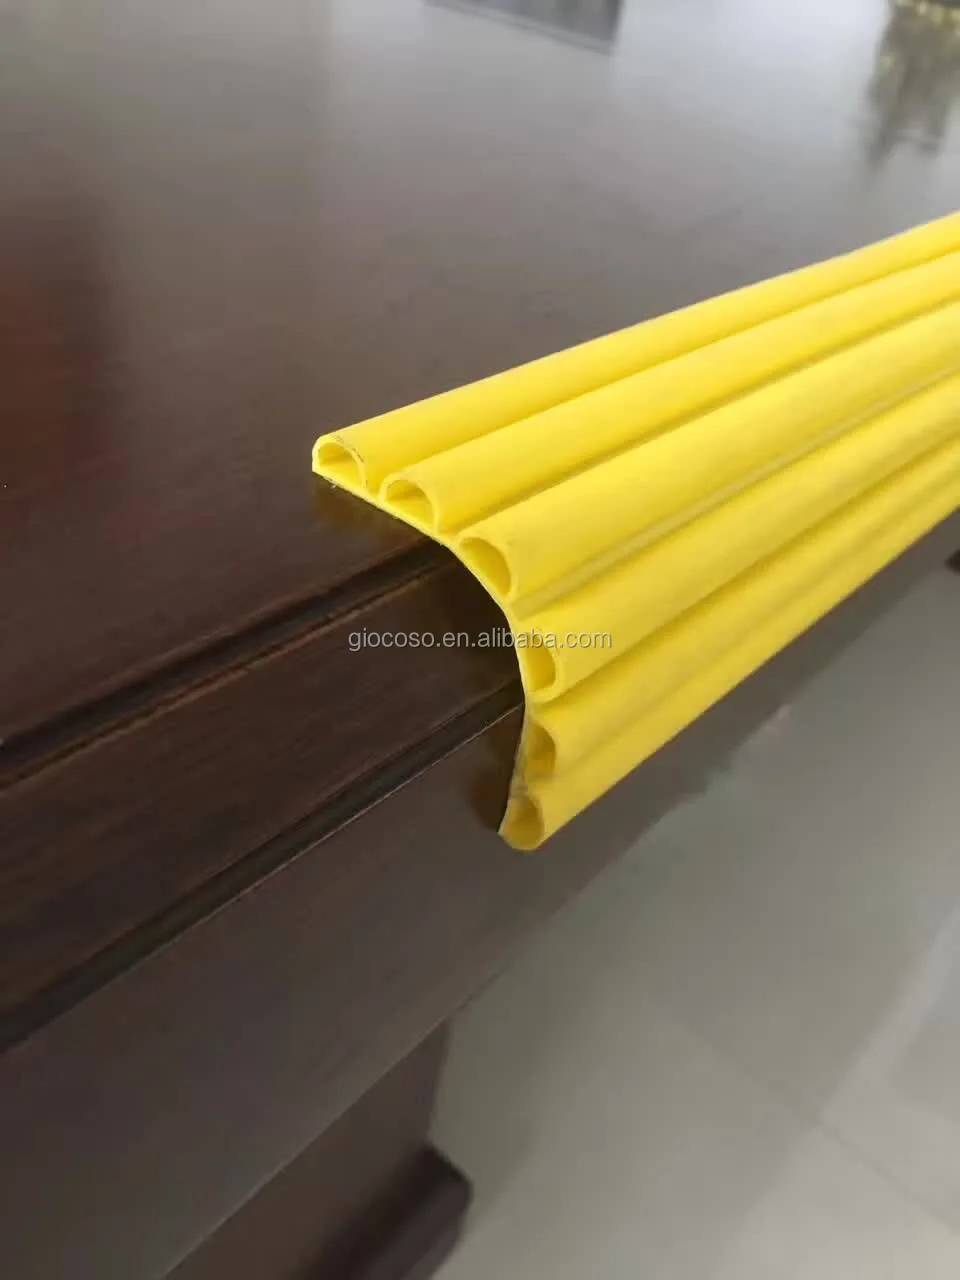 High Quality Childproofing Safe Wall Edge Protector And Corner Cushion/Edge And Corner Guard